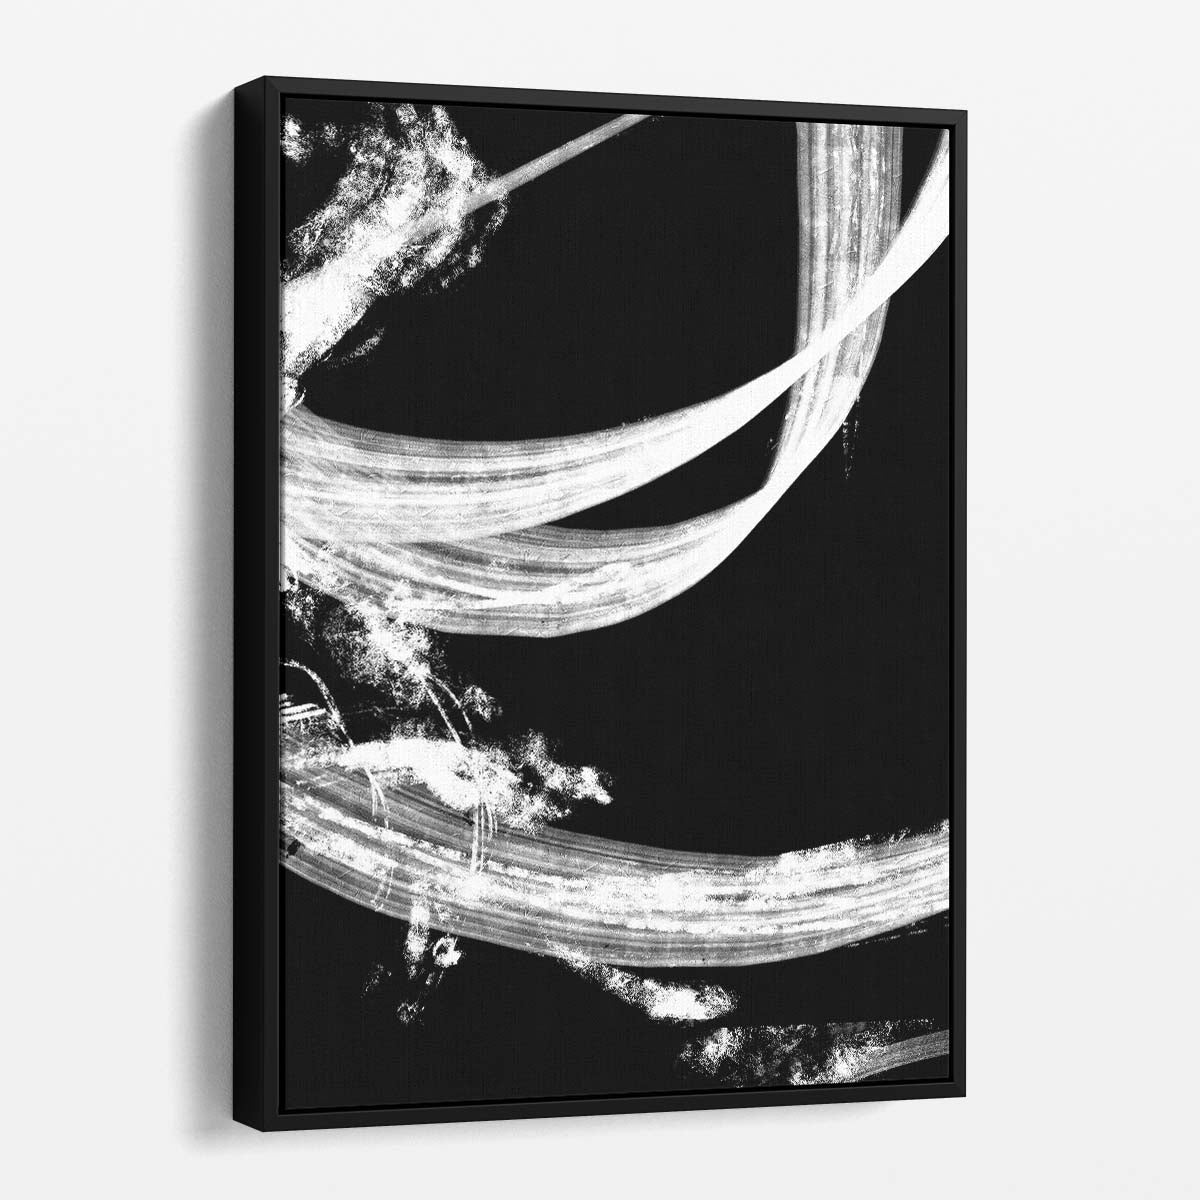 Monochrome Abstract Geometric Illustration Tapestry - Painterly Black and White by Luxuriance Designs, made in USA